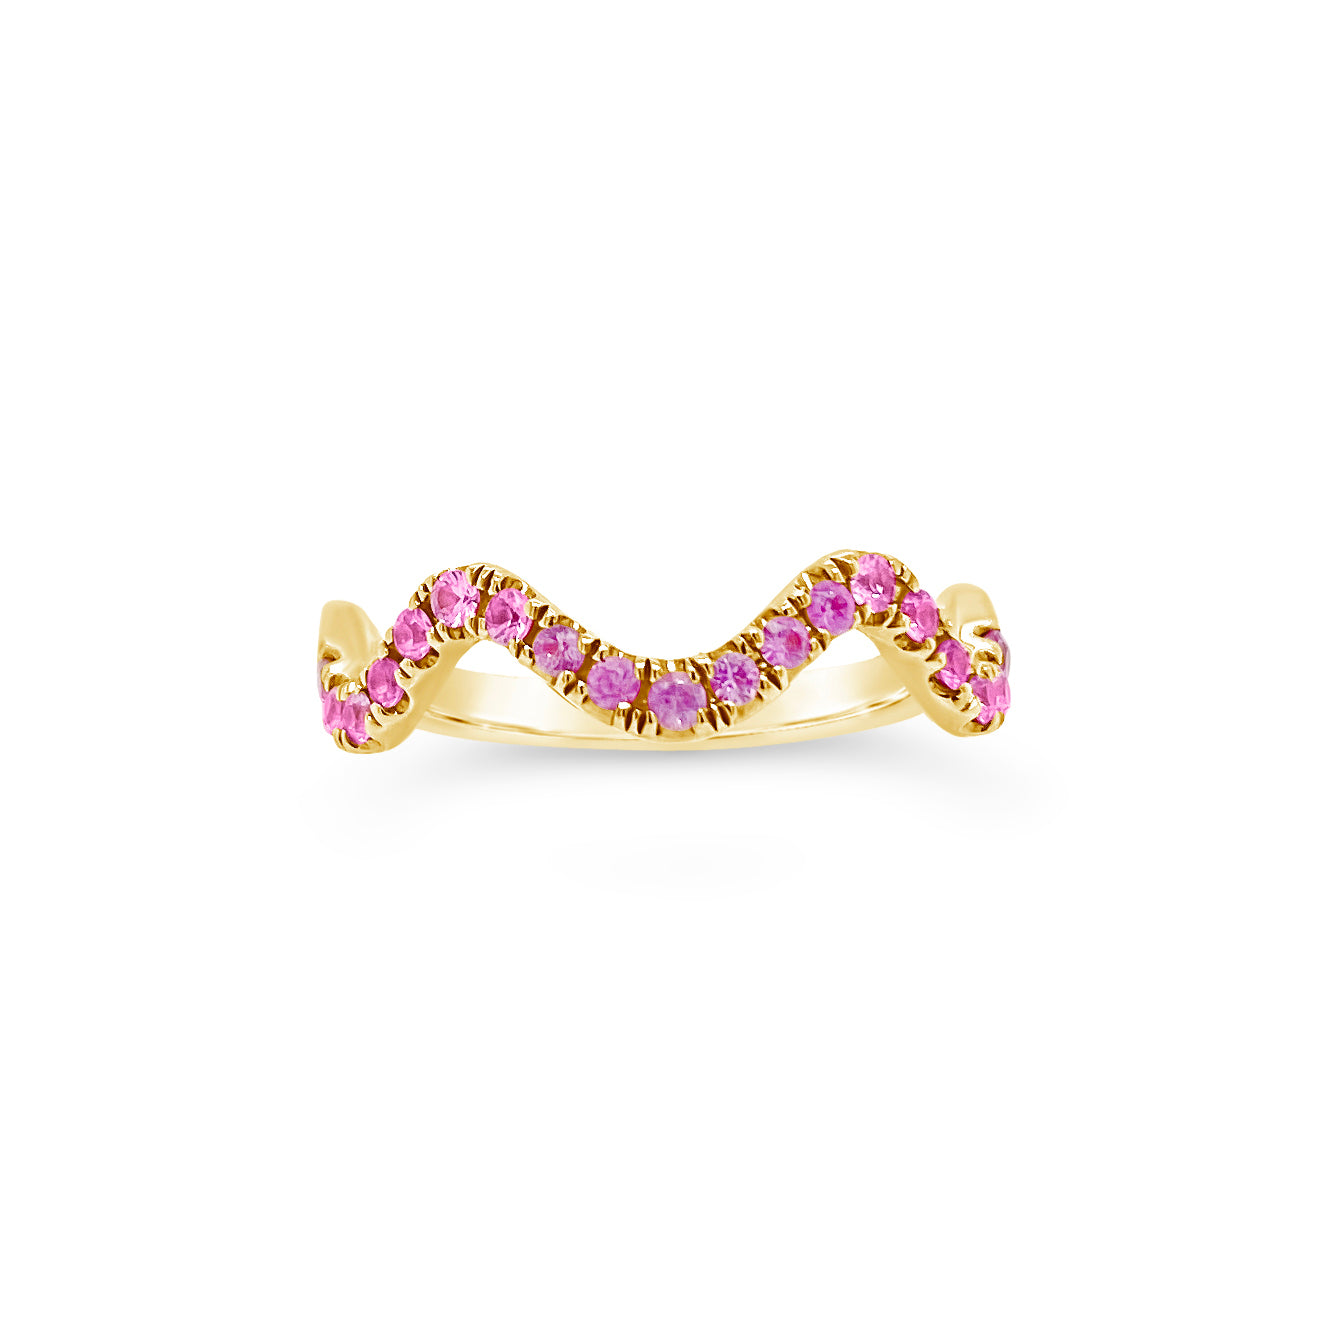 Pink Sapphire Stackable Wavy Ring  - 14K gold weighing 1.80 grams  - 19 pink sapphires totaling 0.32 carats